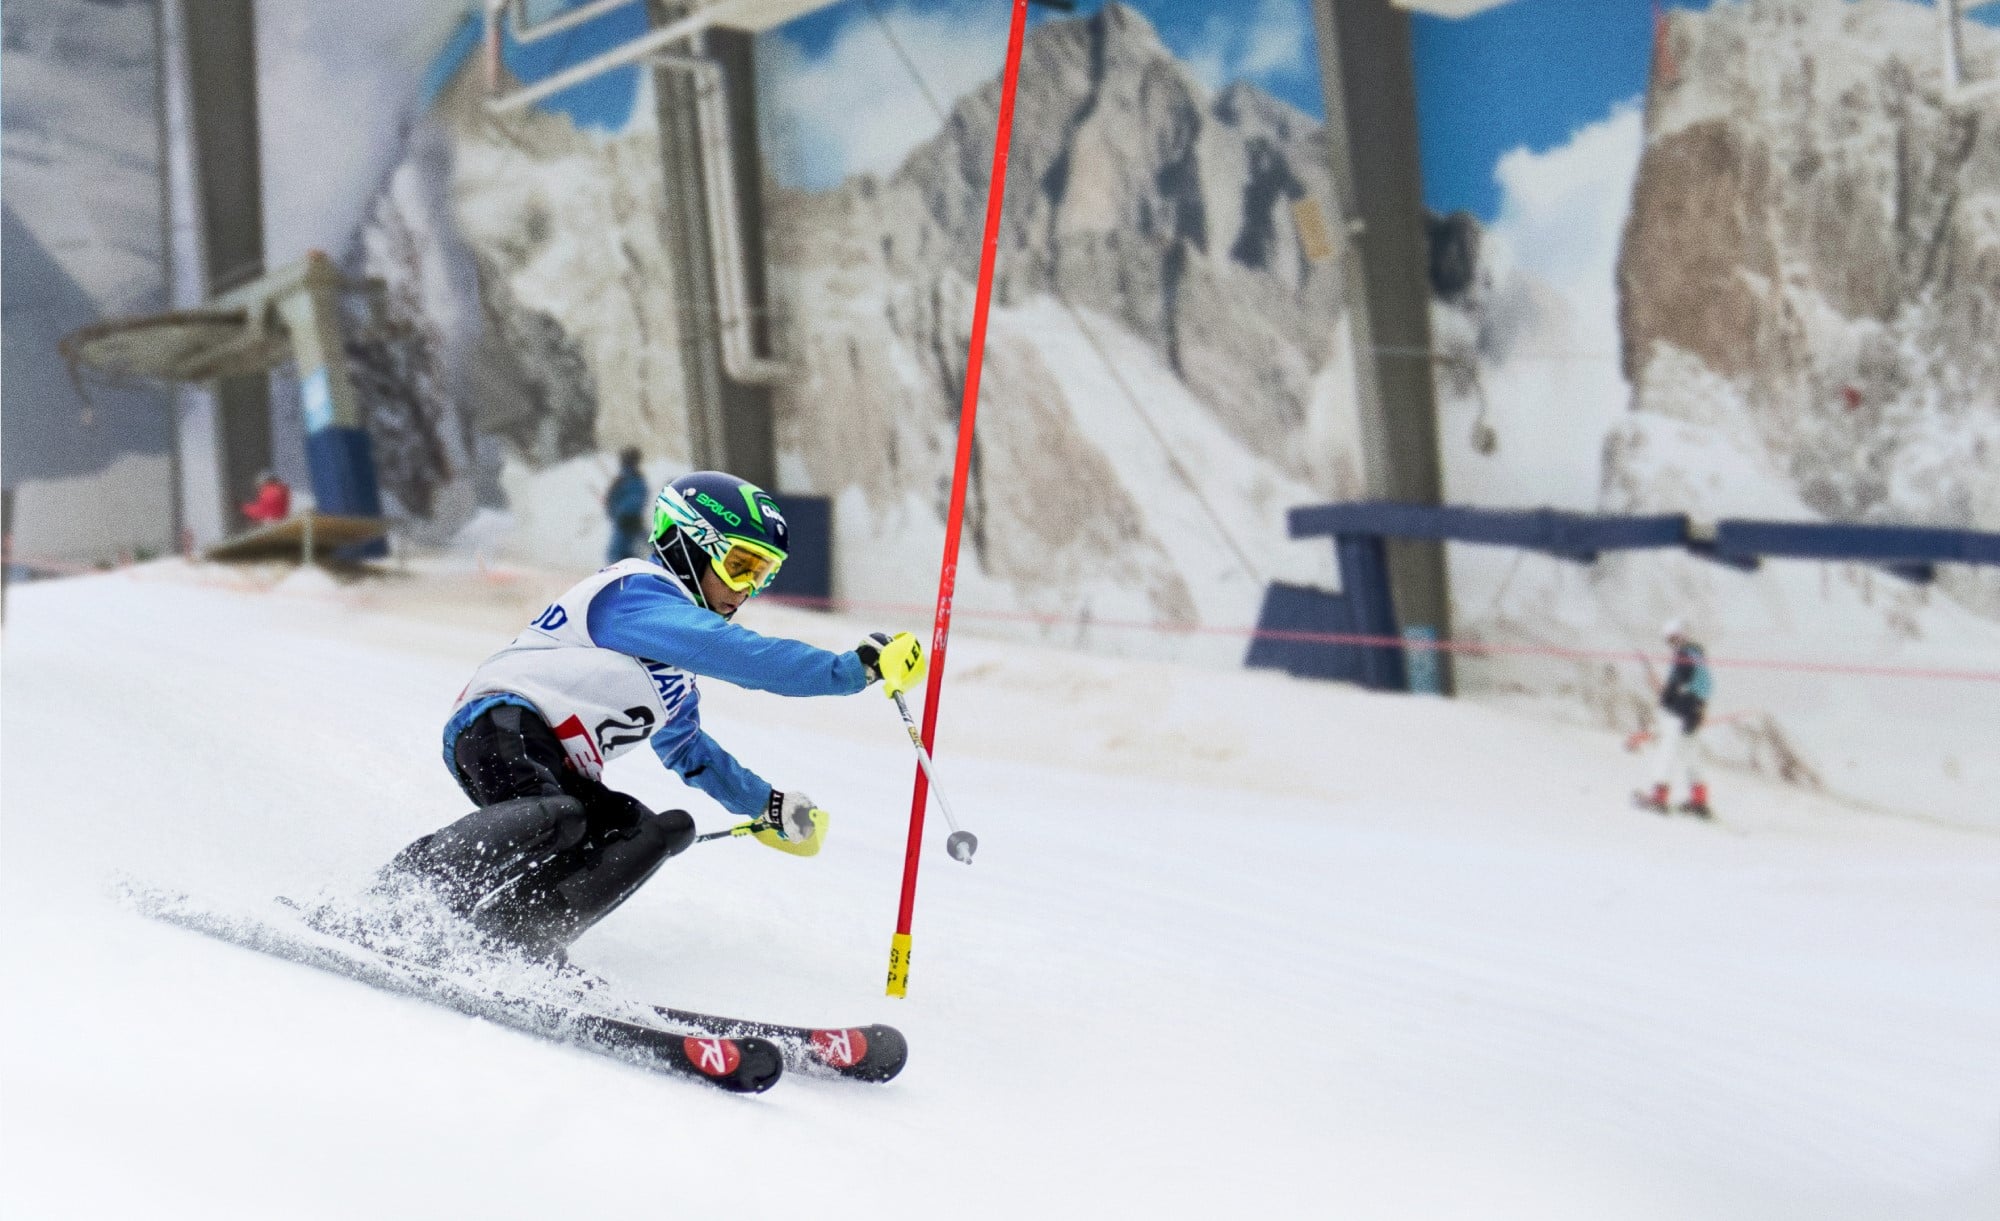 Ski racer on a Slalom course at Snowplanet